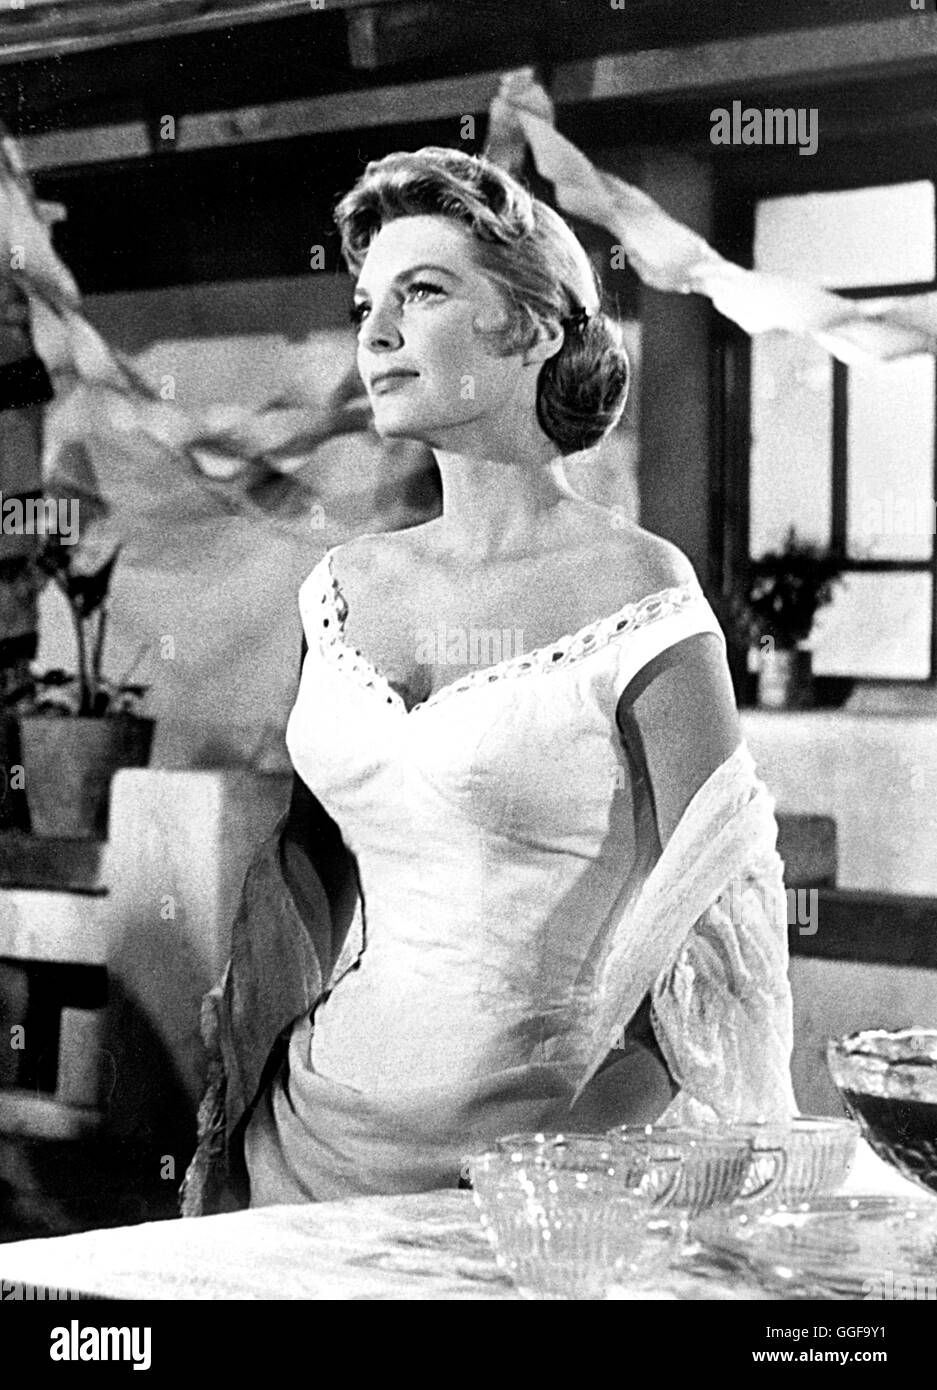 HEISSE GRENZE / The Wonderful Country USA 1959 / Robert Parrish JULIE LONDON (Helen Colton) in 'The Wonderful Country', 1959.  Regie: Robert Parrish aka. The Wonderful Country Stock Photo